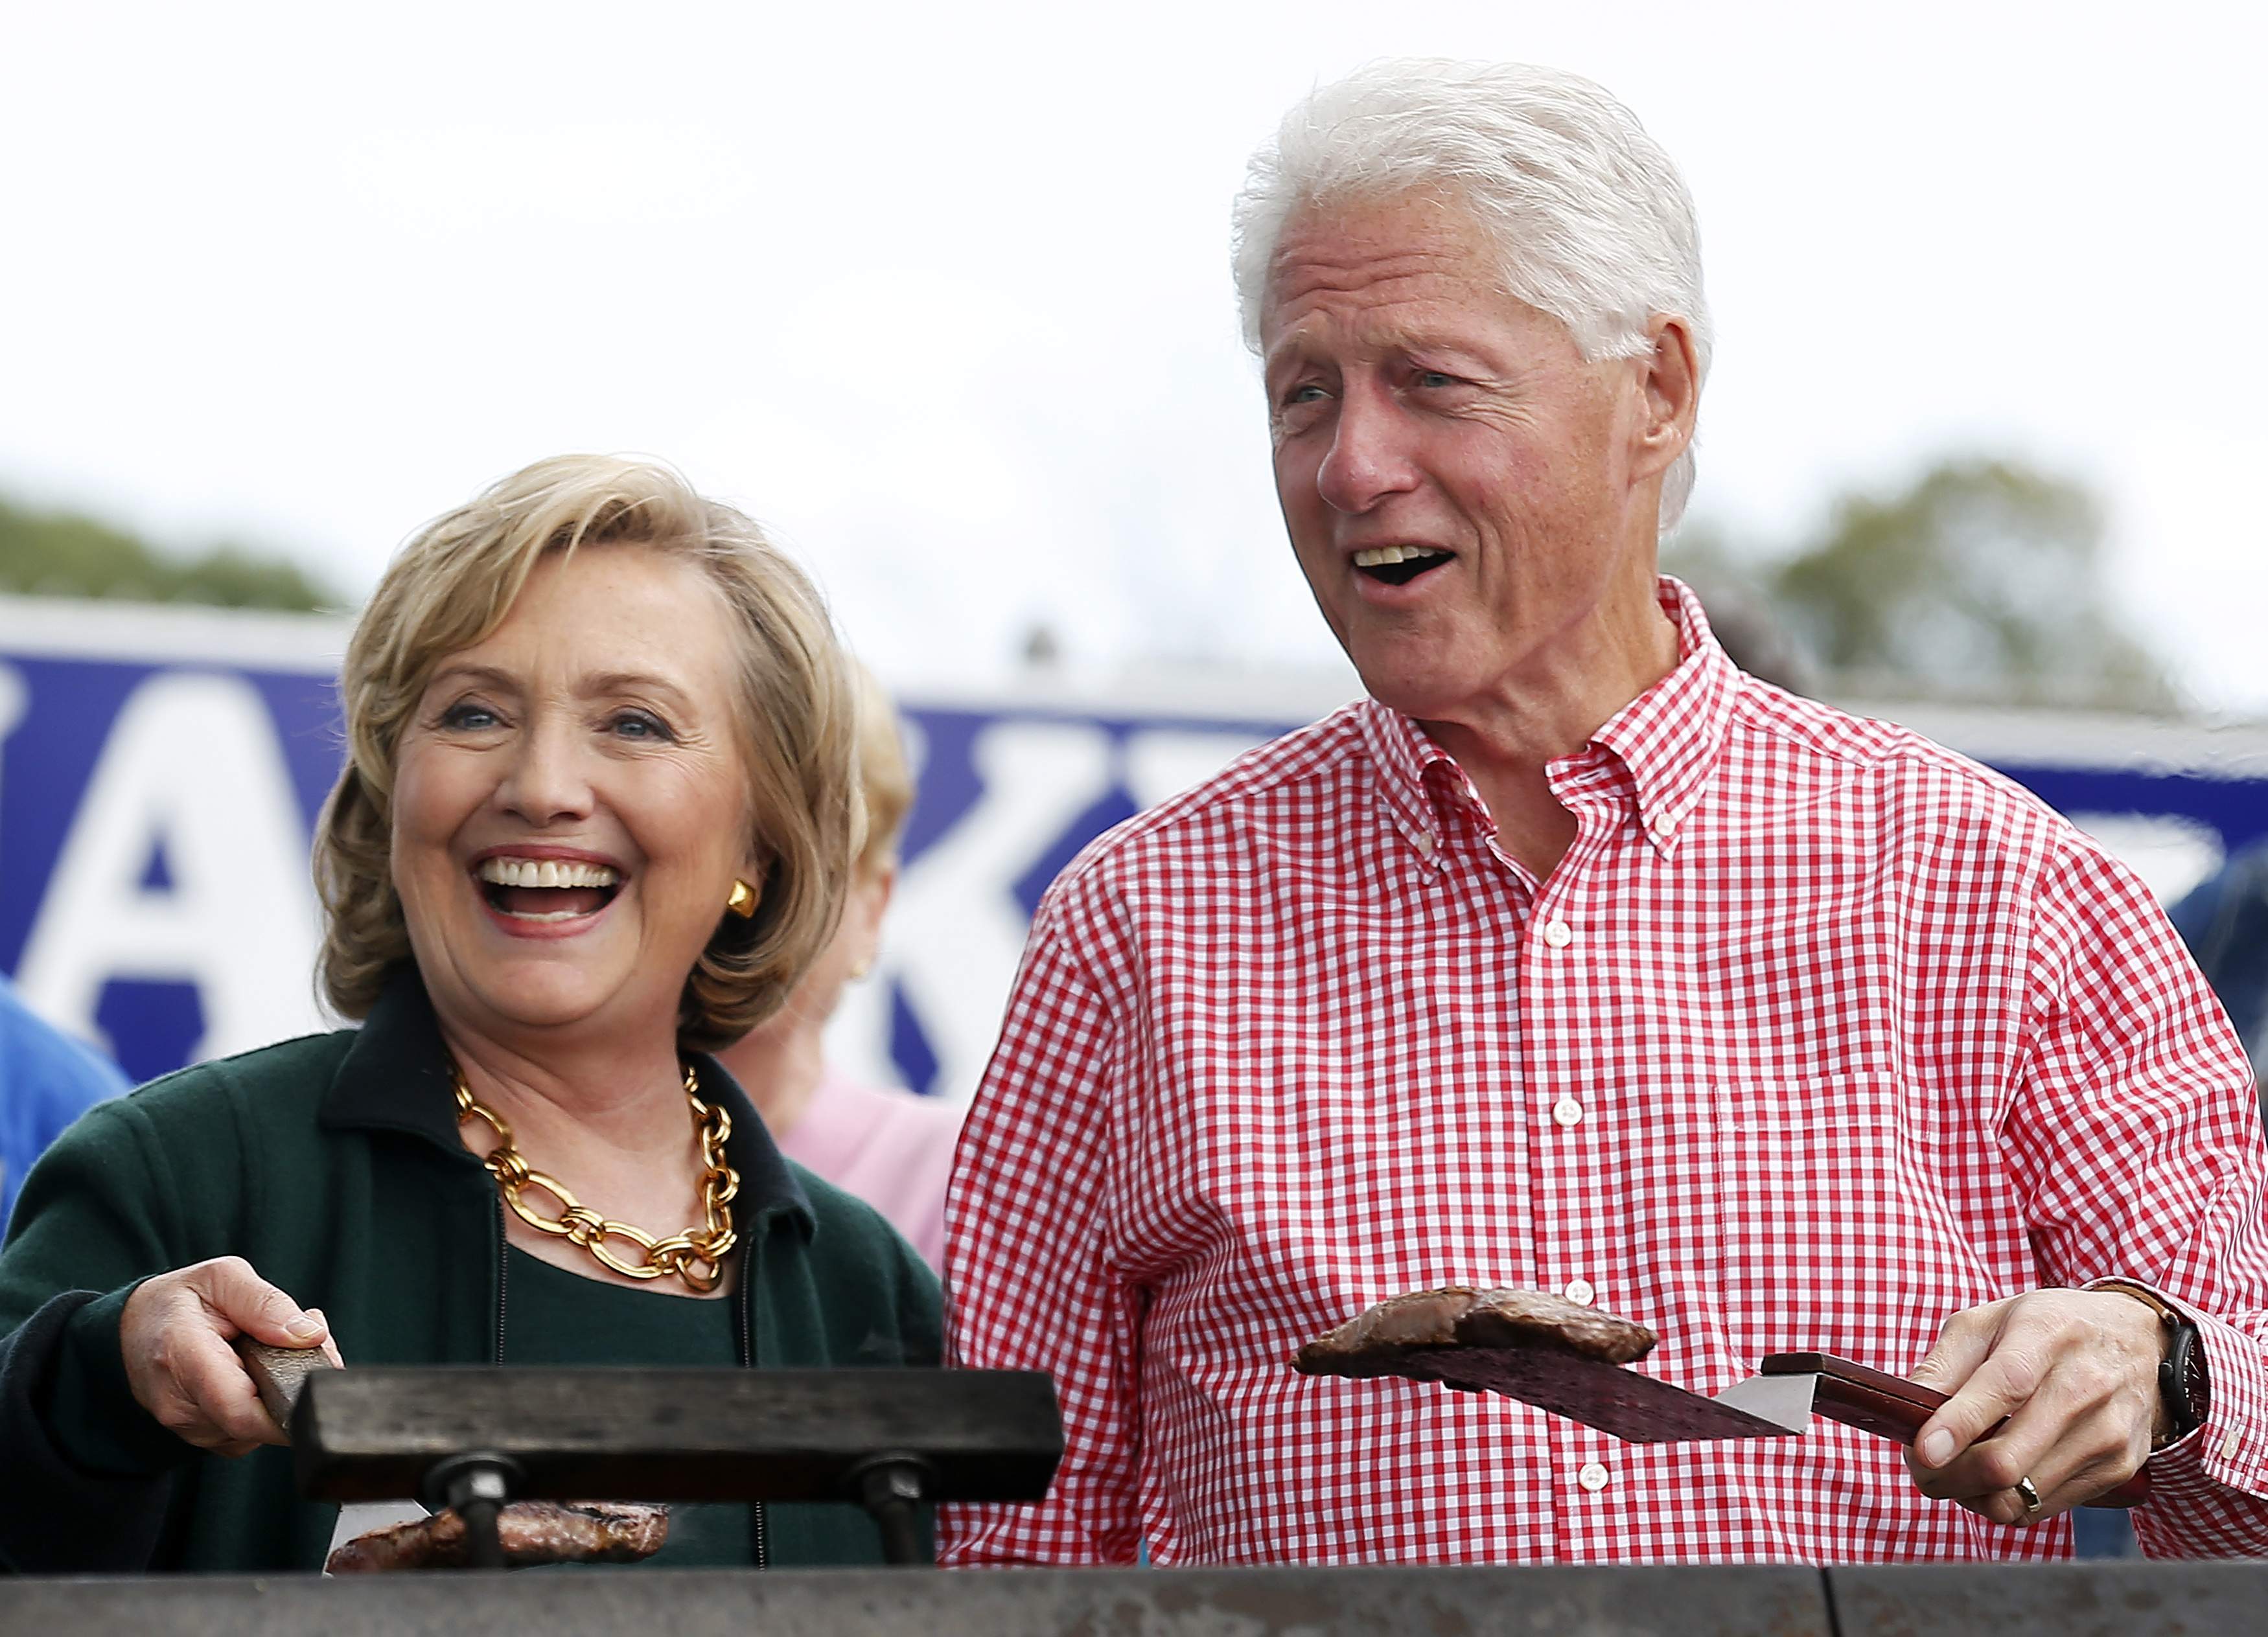 Clinton and her husband hold up some steaks at the 37th Harkin Steak Fry in Indianola, Iowa. (Photo: Jim Young/Reuters/Newscom)